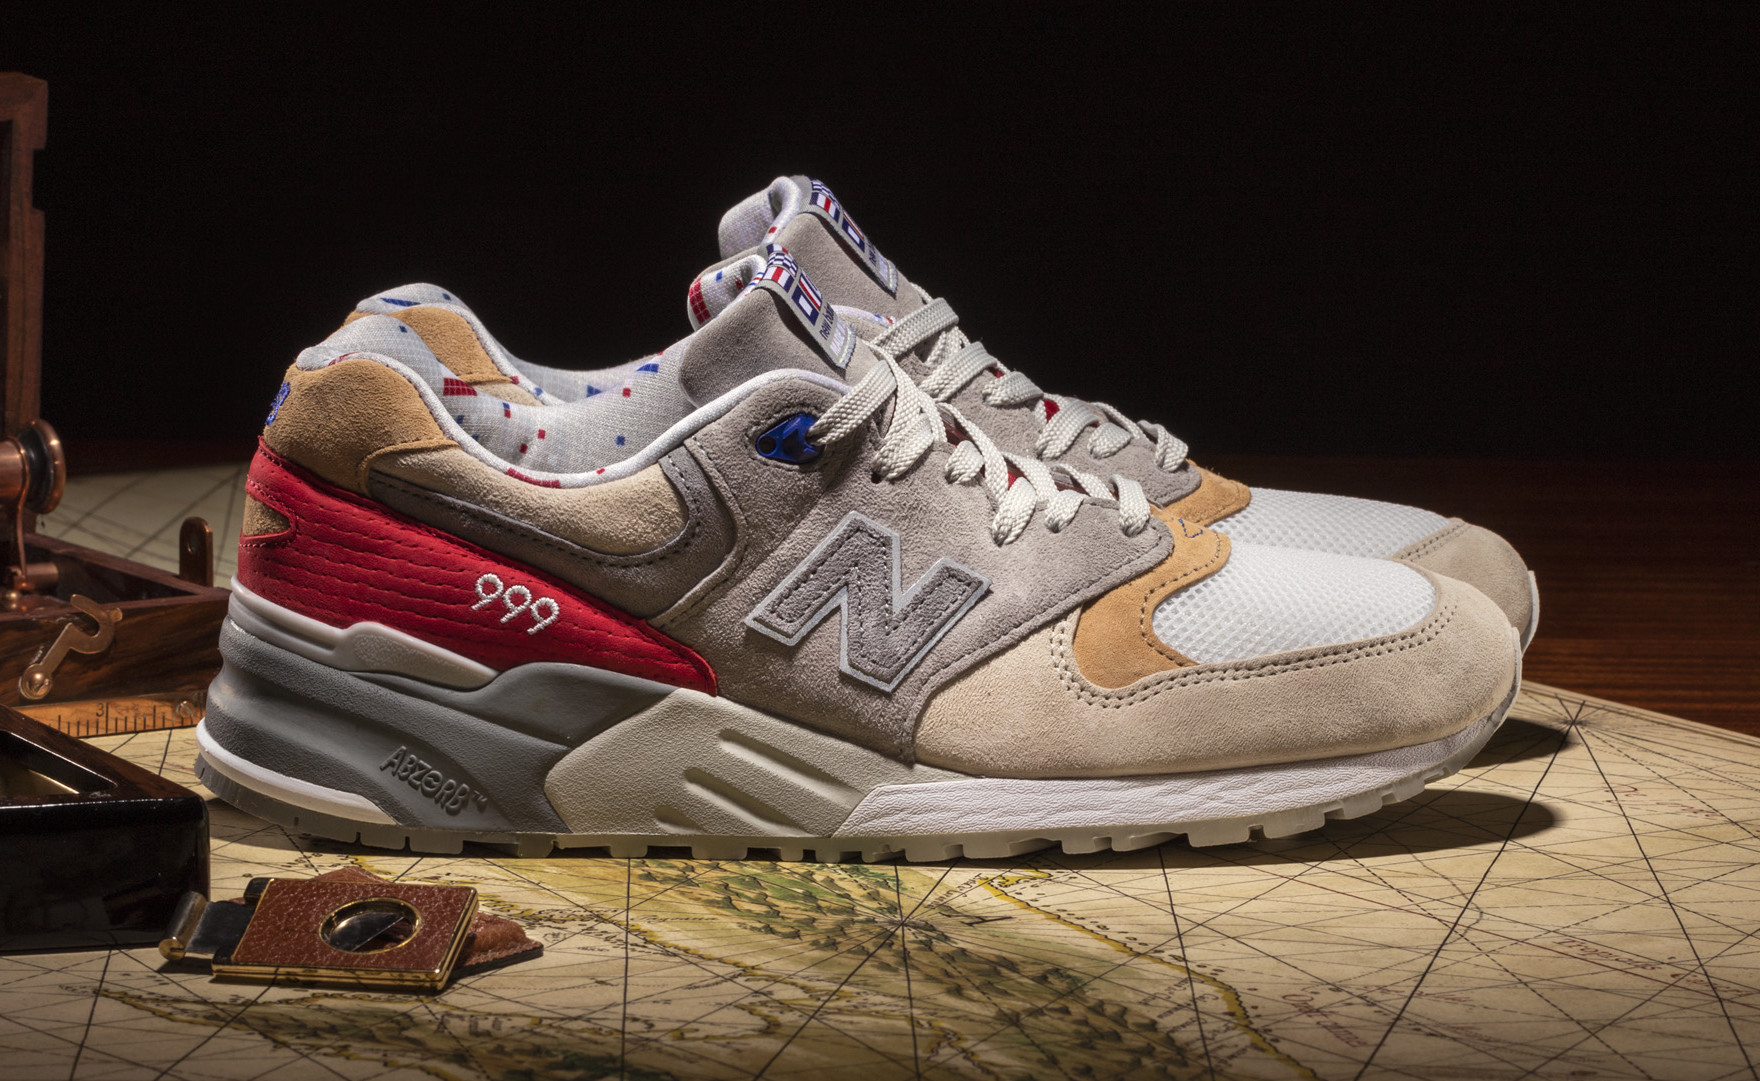 new balance 999 concepts the kennedy